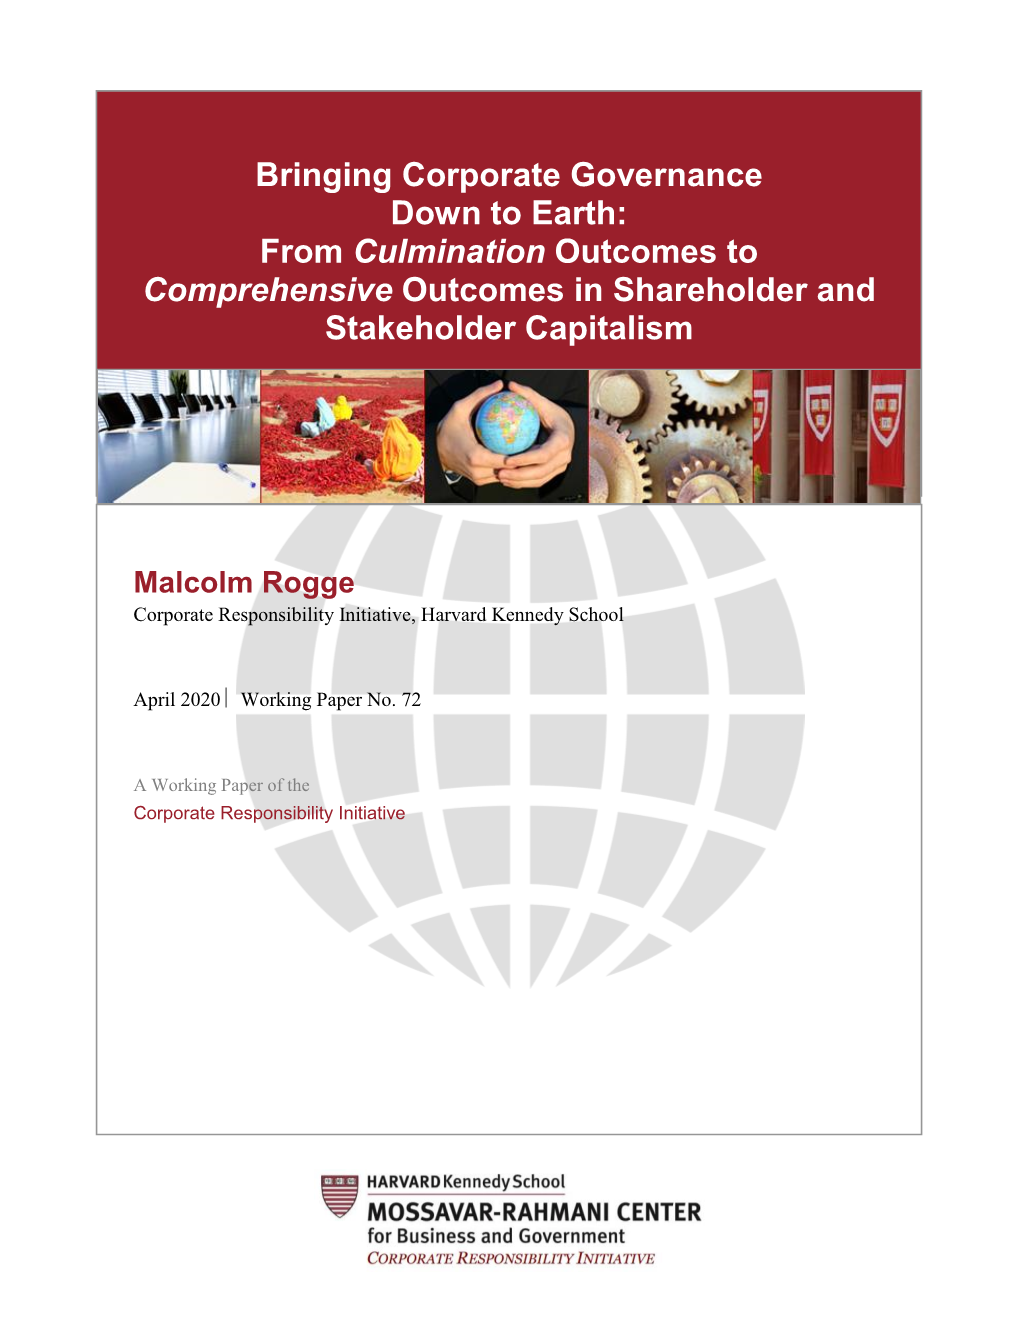 Bringing Corporate Governance Down to Earth: from Culmination Outcomes to Comprehensive Outcomes in Shareholder and Stakeholder Capitalism